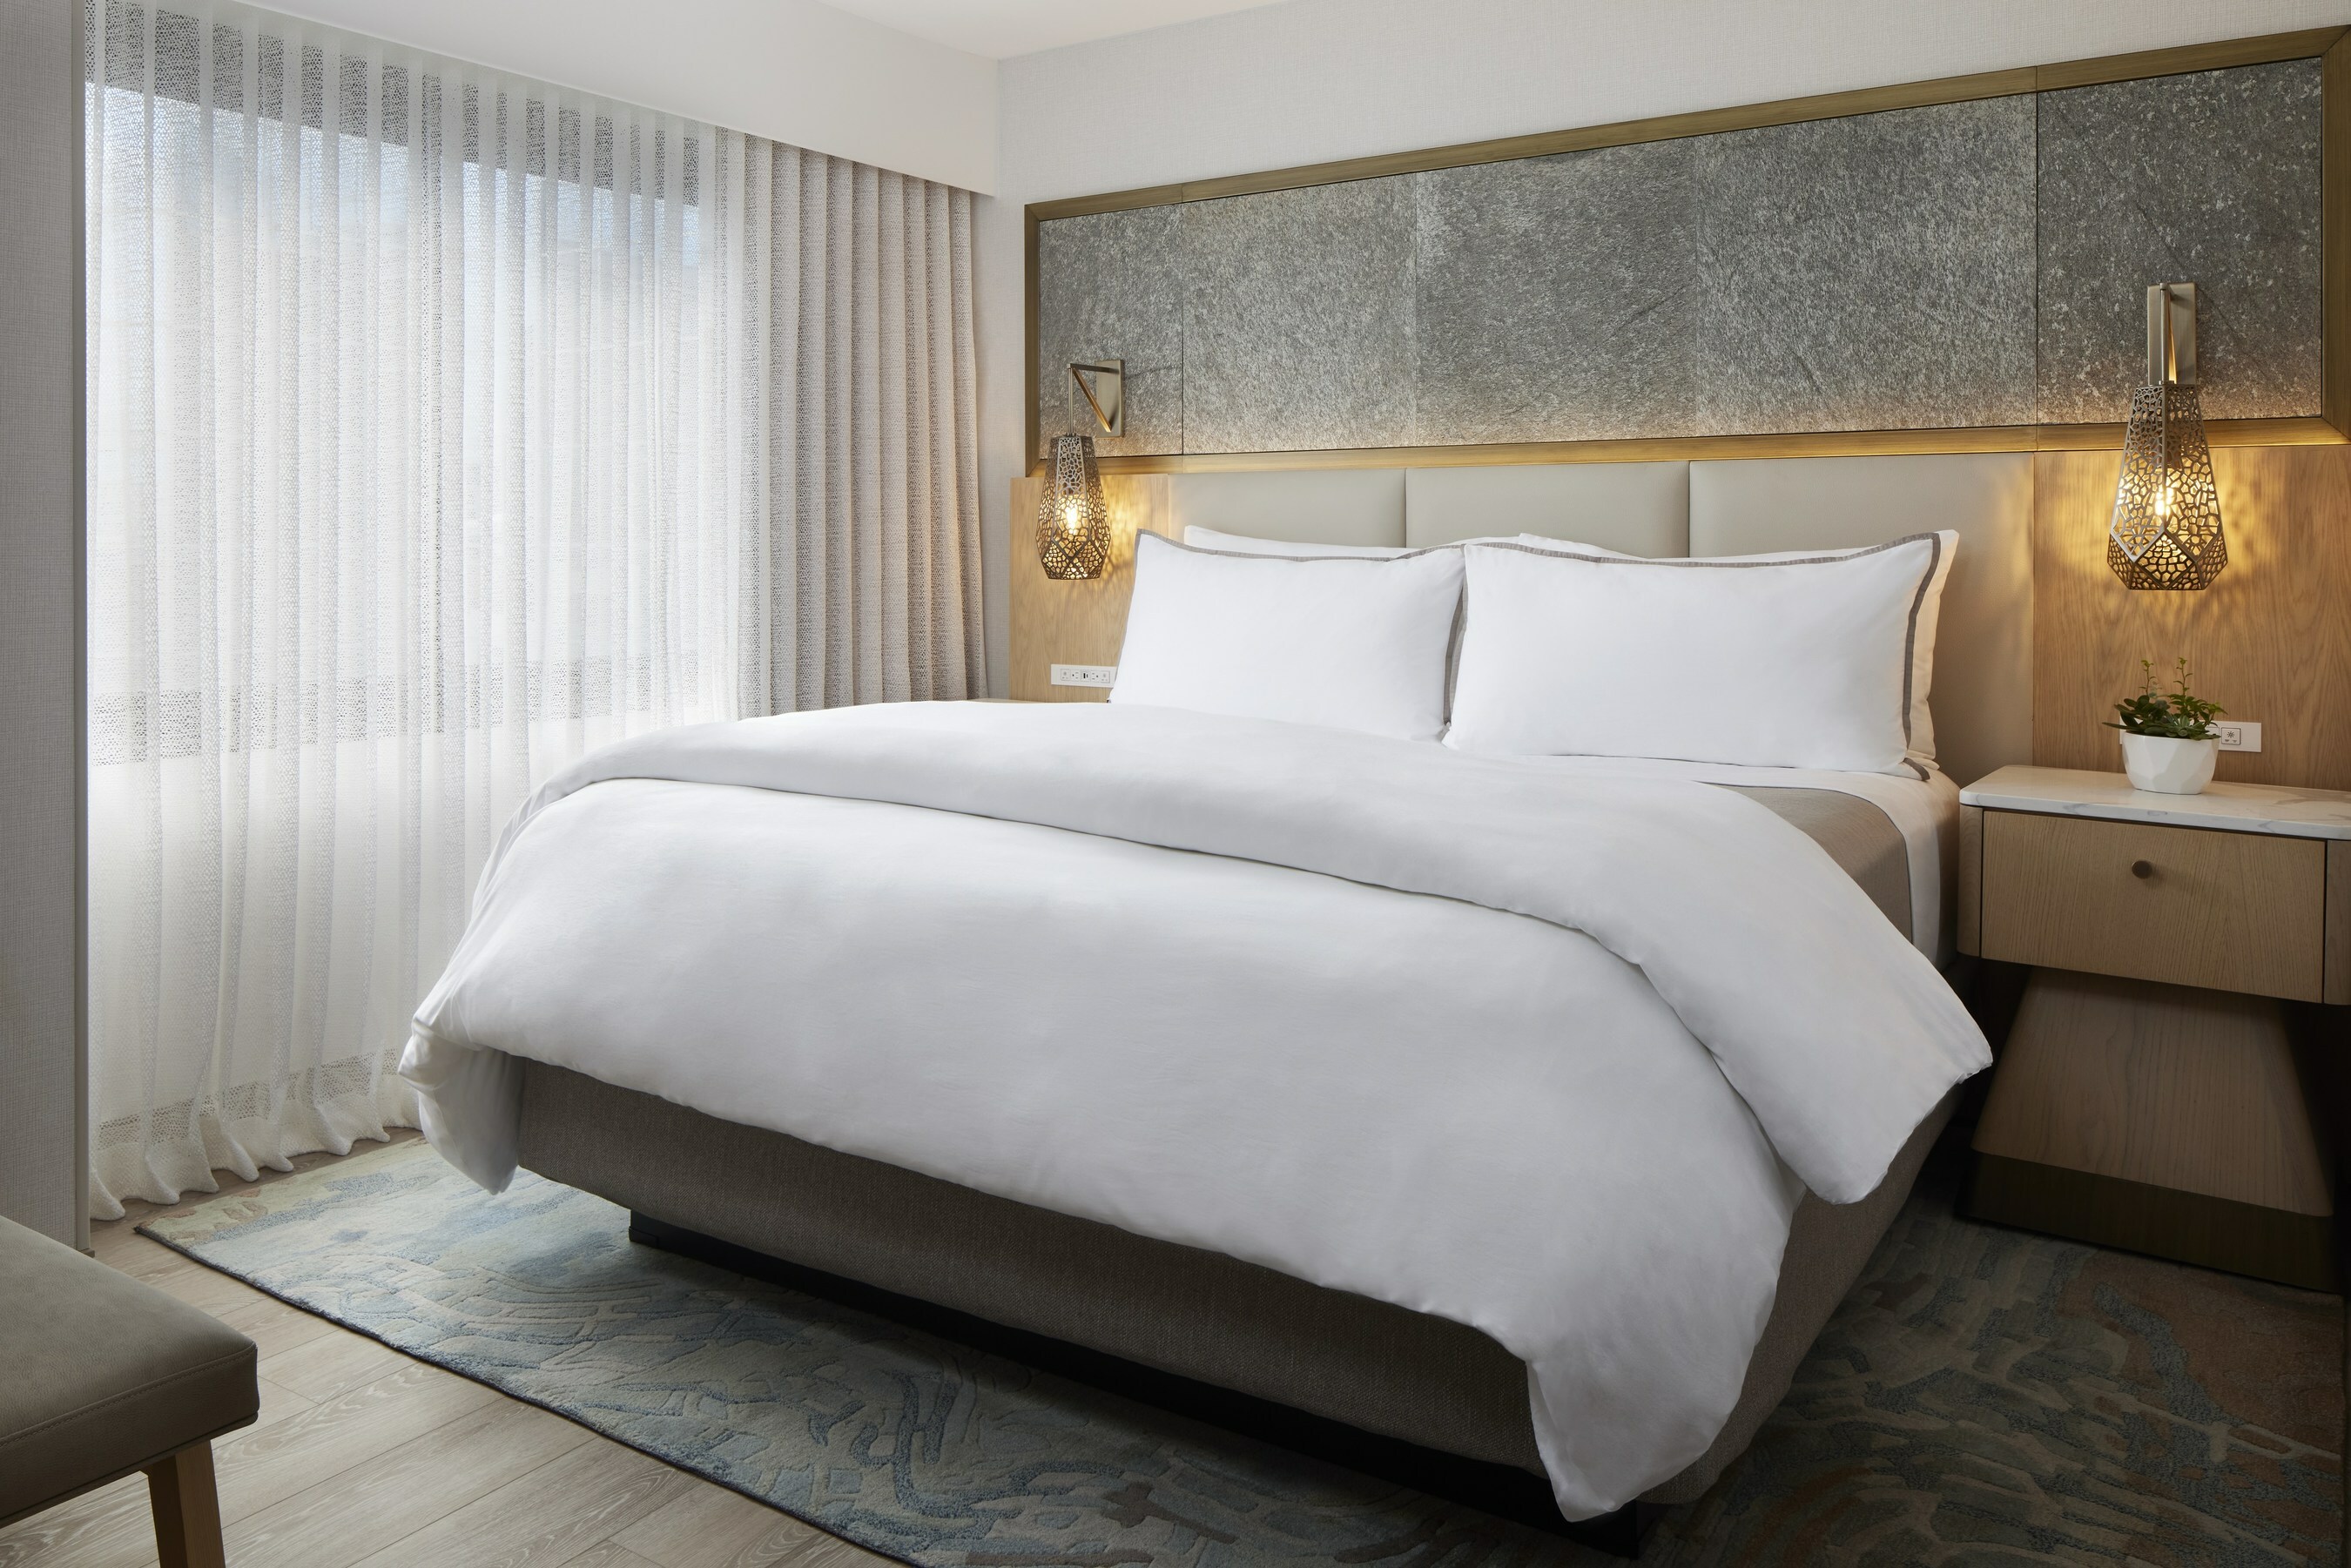 Westin Hotels & Resorts Takes Restorative Sleep to Another Level with Heavenly Bed